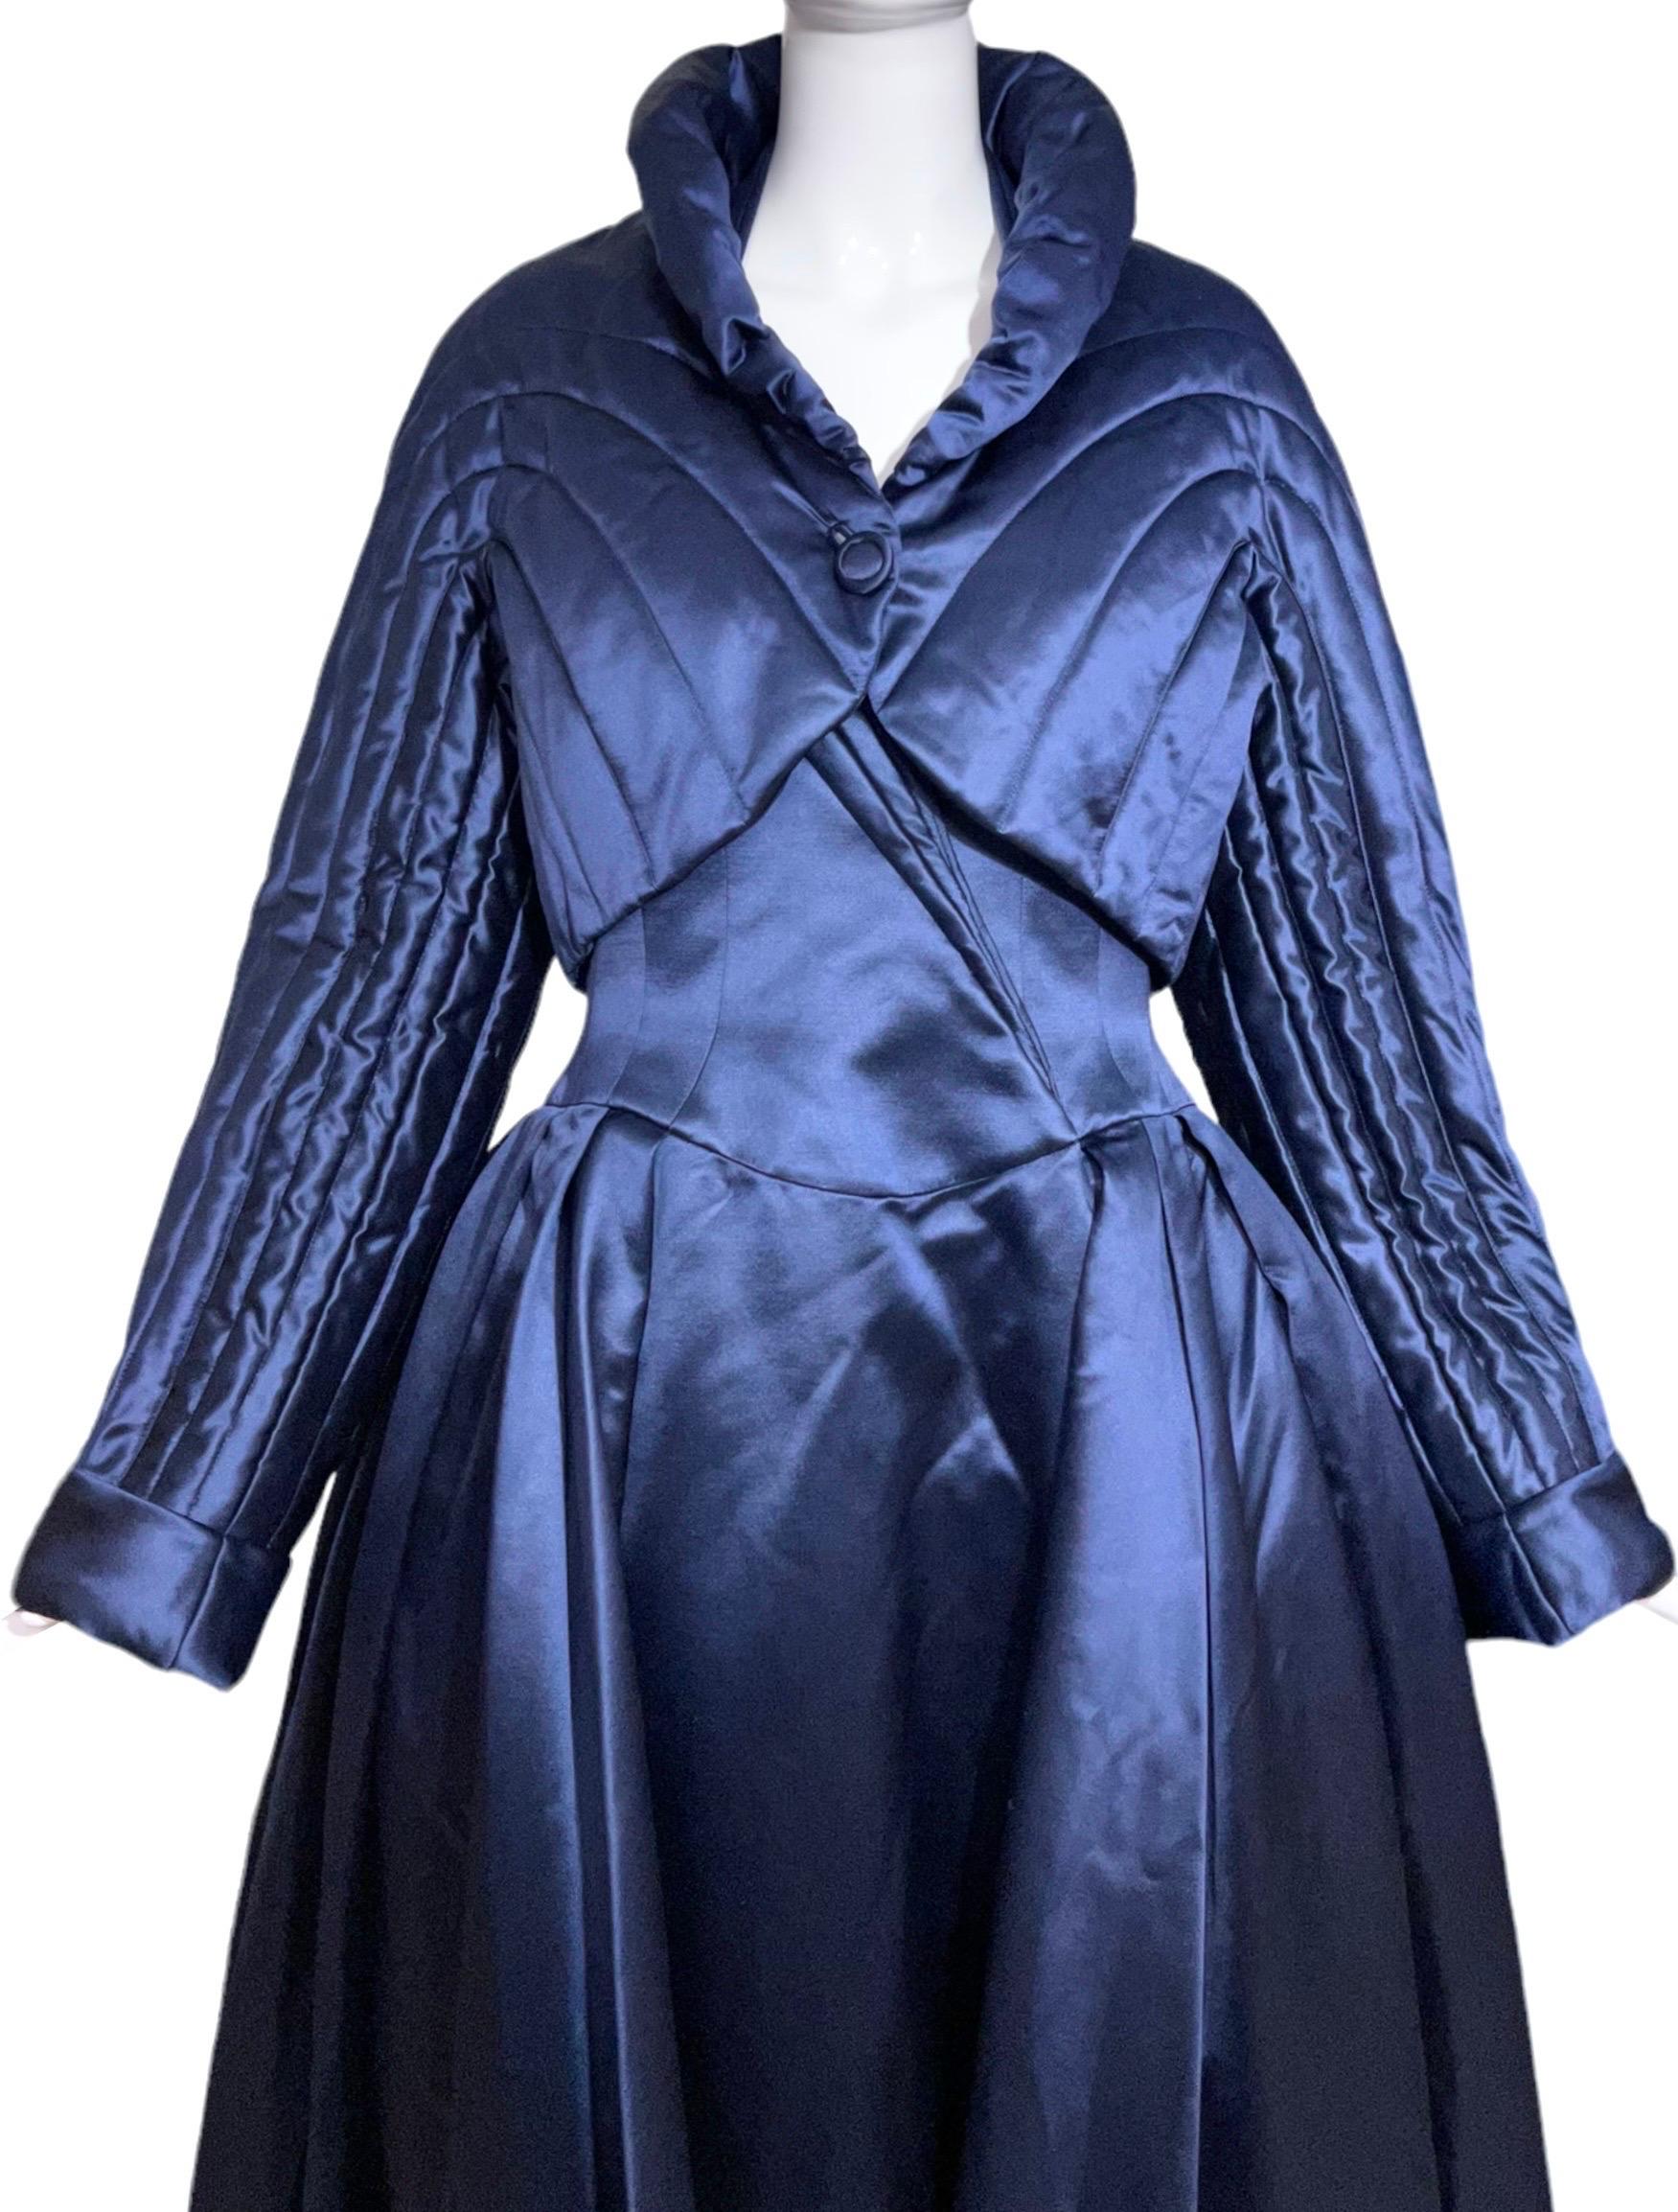 Thierry Mugler Haute Couture extravagant dramatic ballgown and matching jacket ensemble set in a rich midnight blue color. This avant-garde ensemble includes a regal pleated ballgown with incredible draping that features a train, halter neck, open